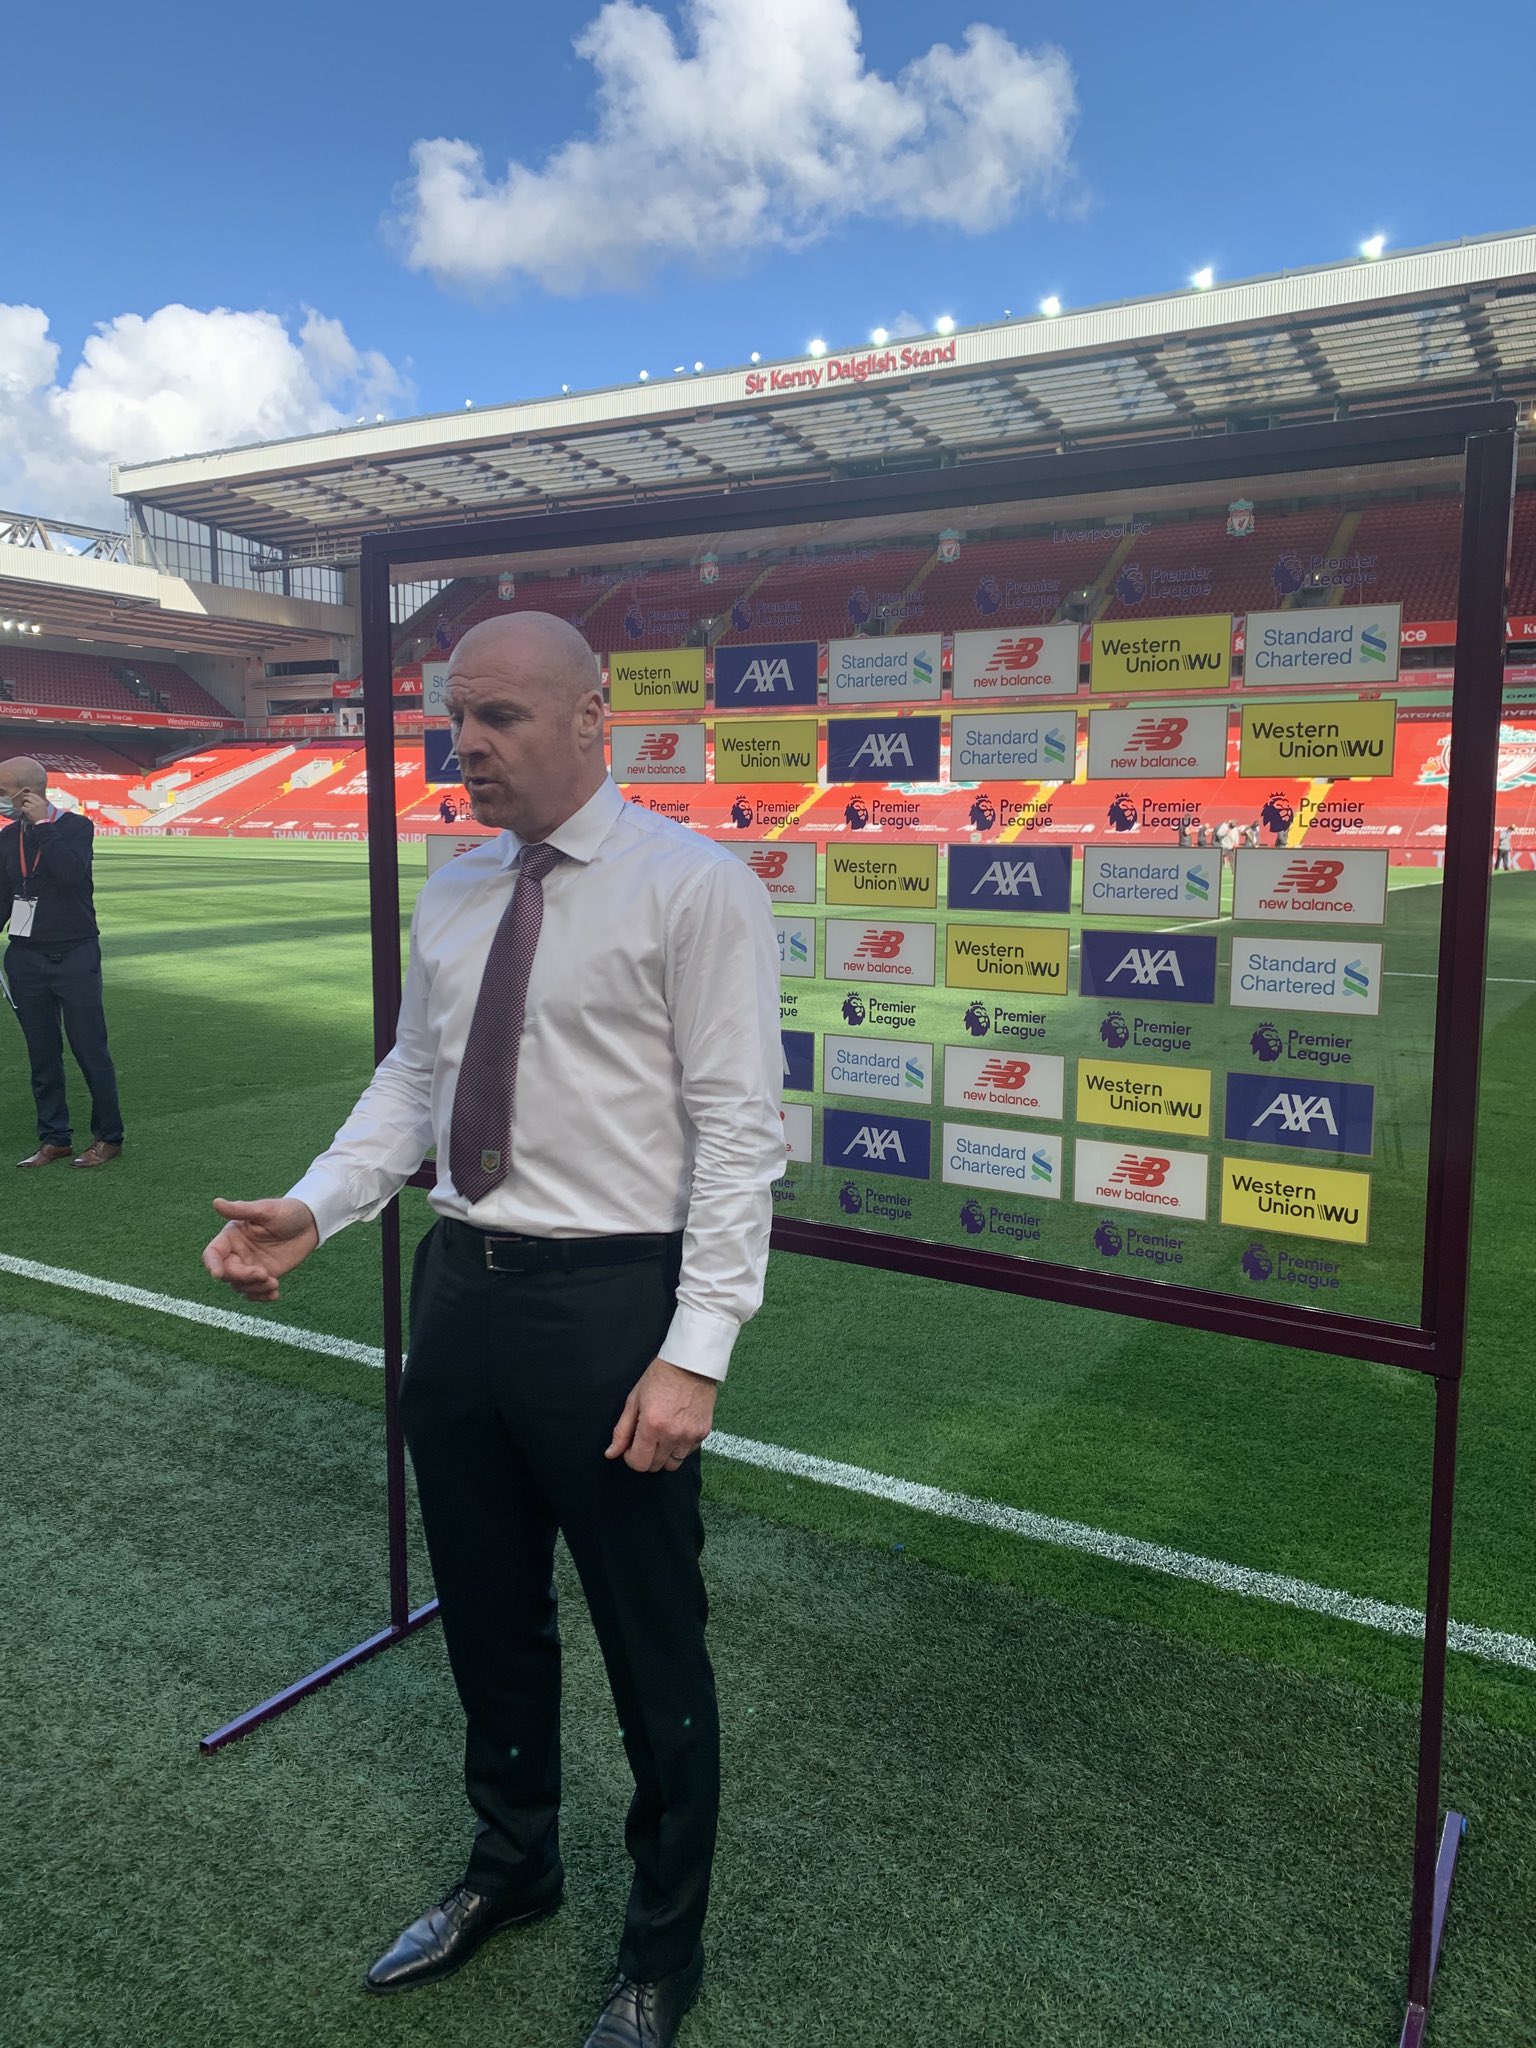 Burnley fires manager of 10 years Sean Dyche with 8 games left in PL